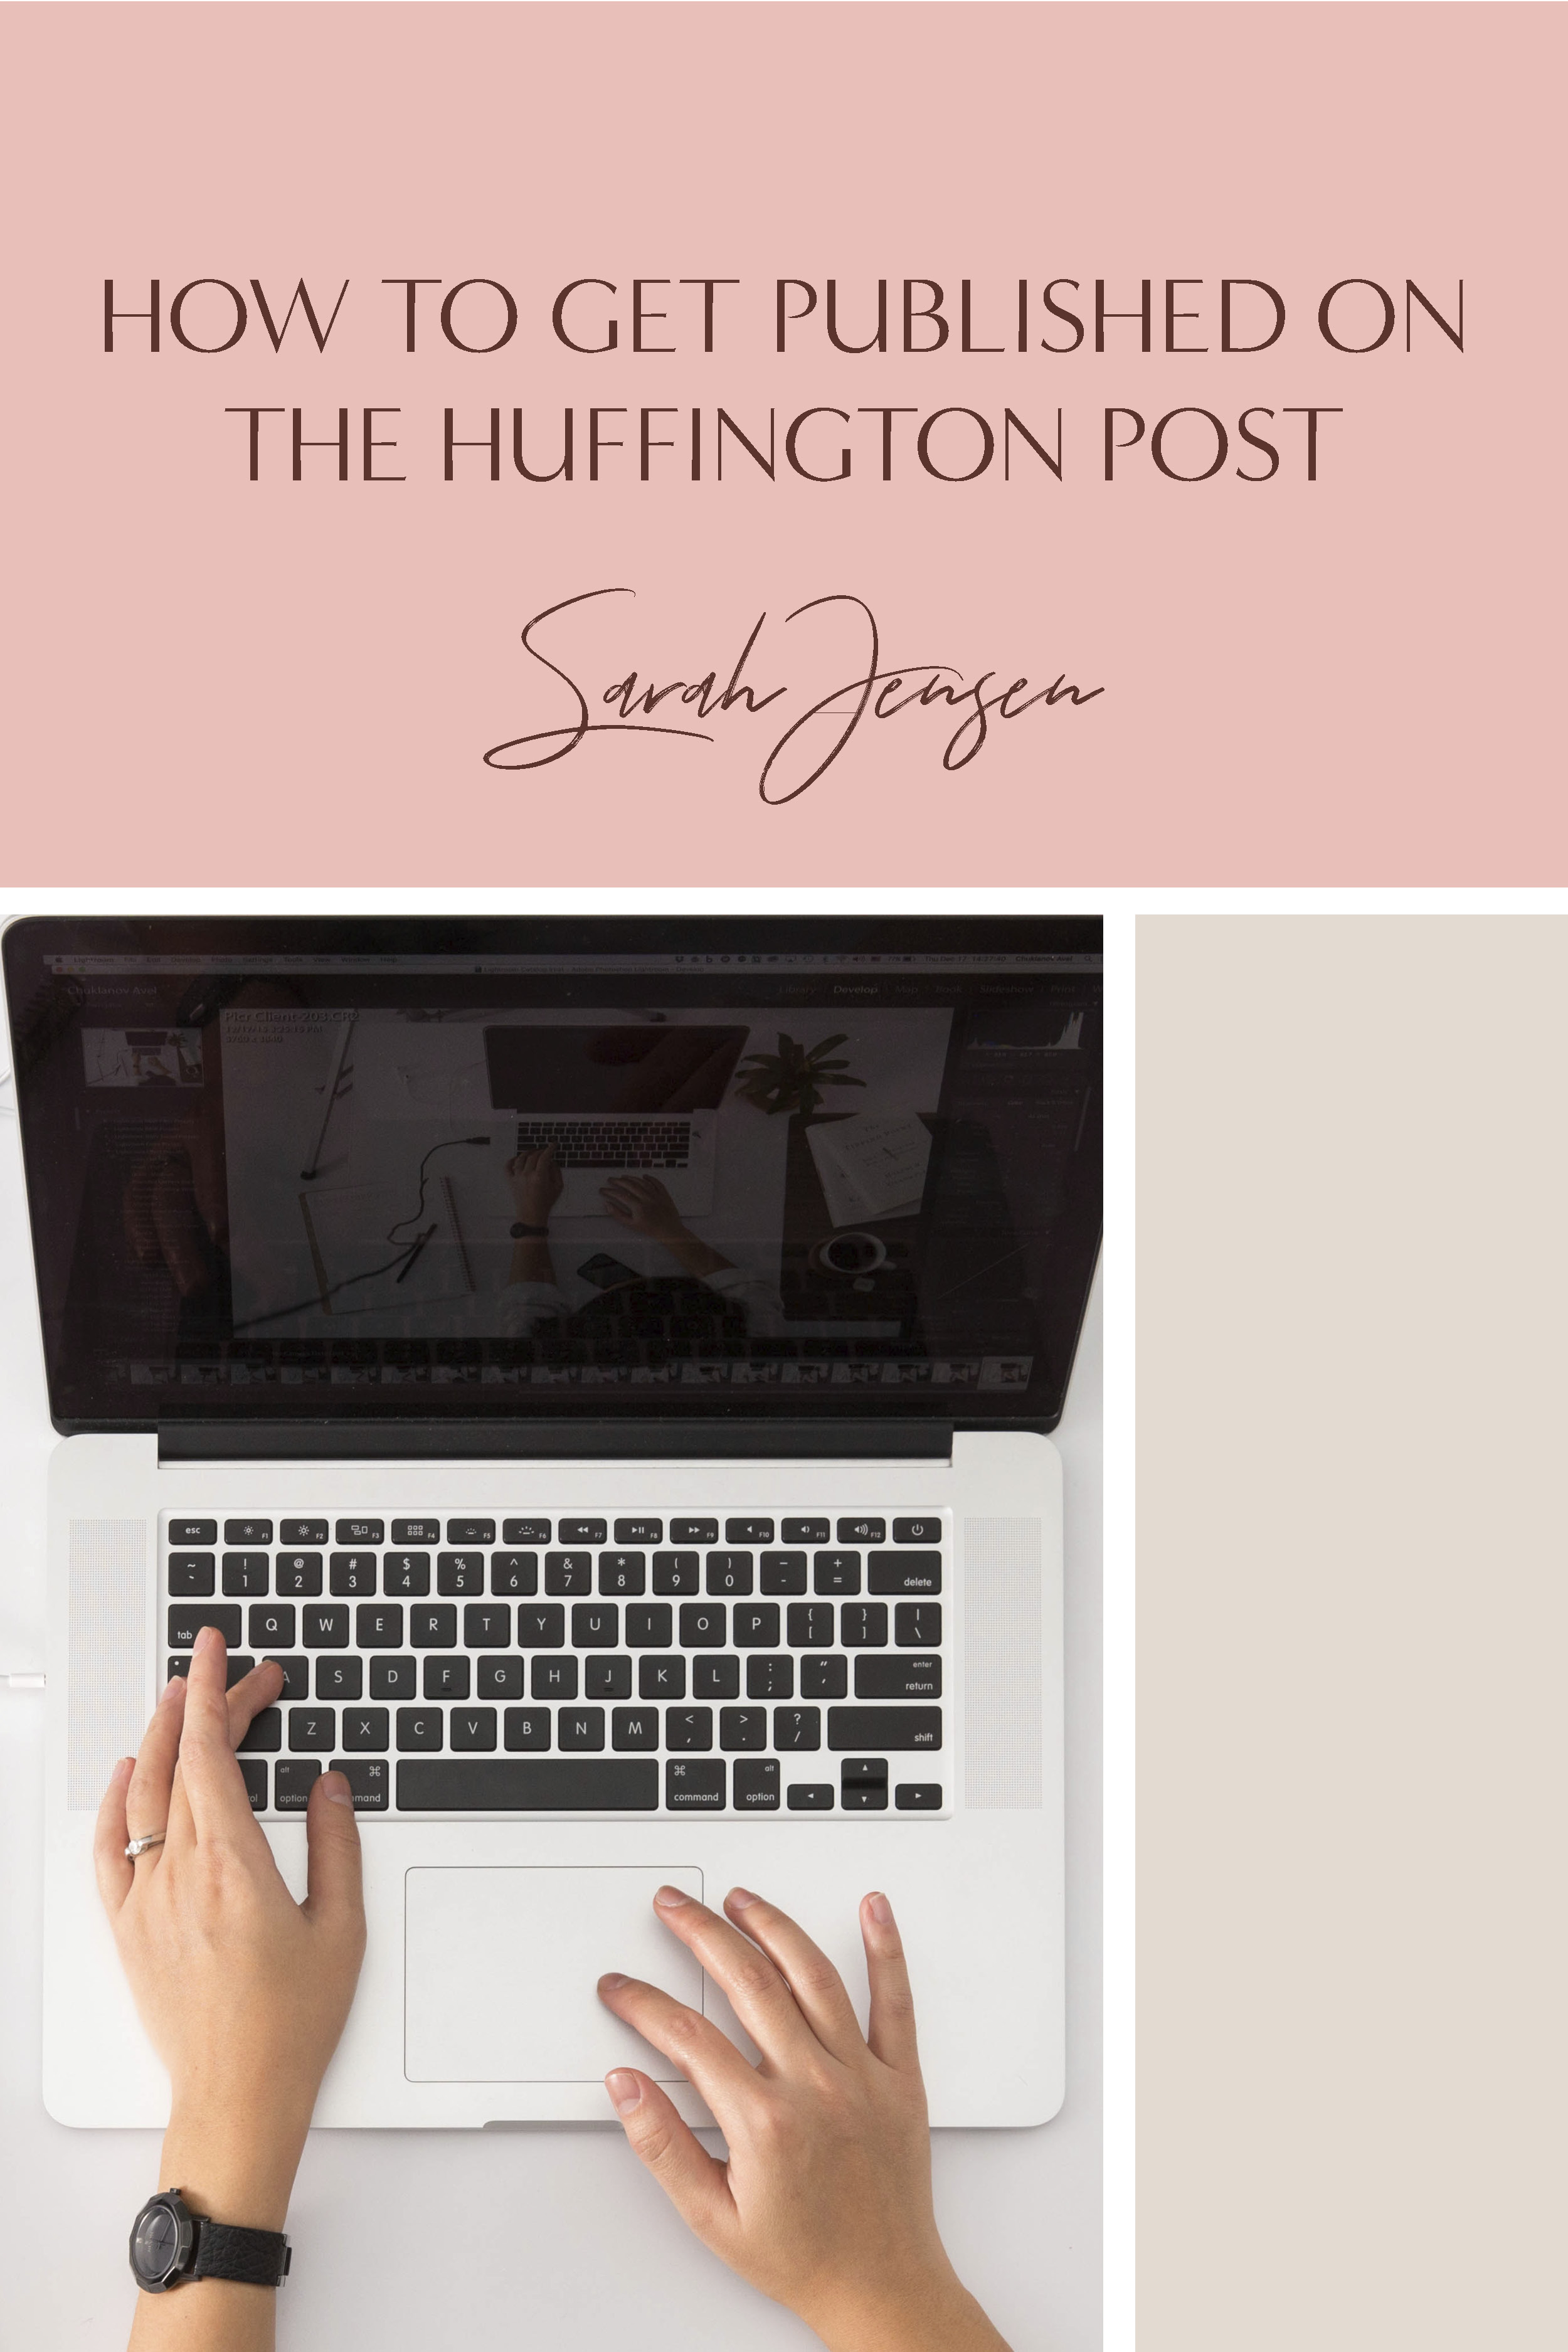 How to get published on the Huffington Post